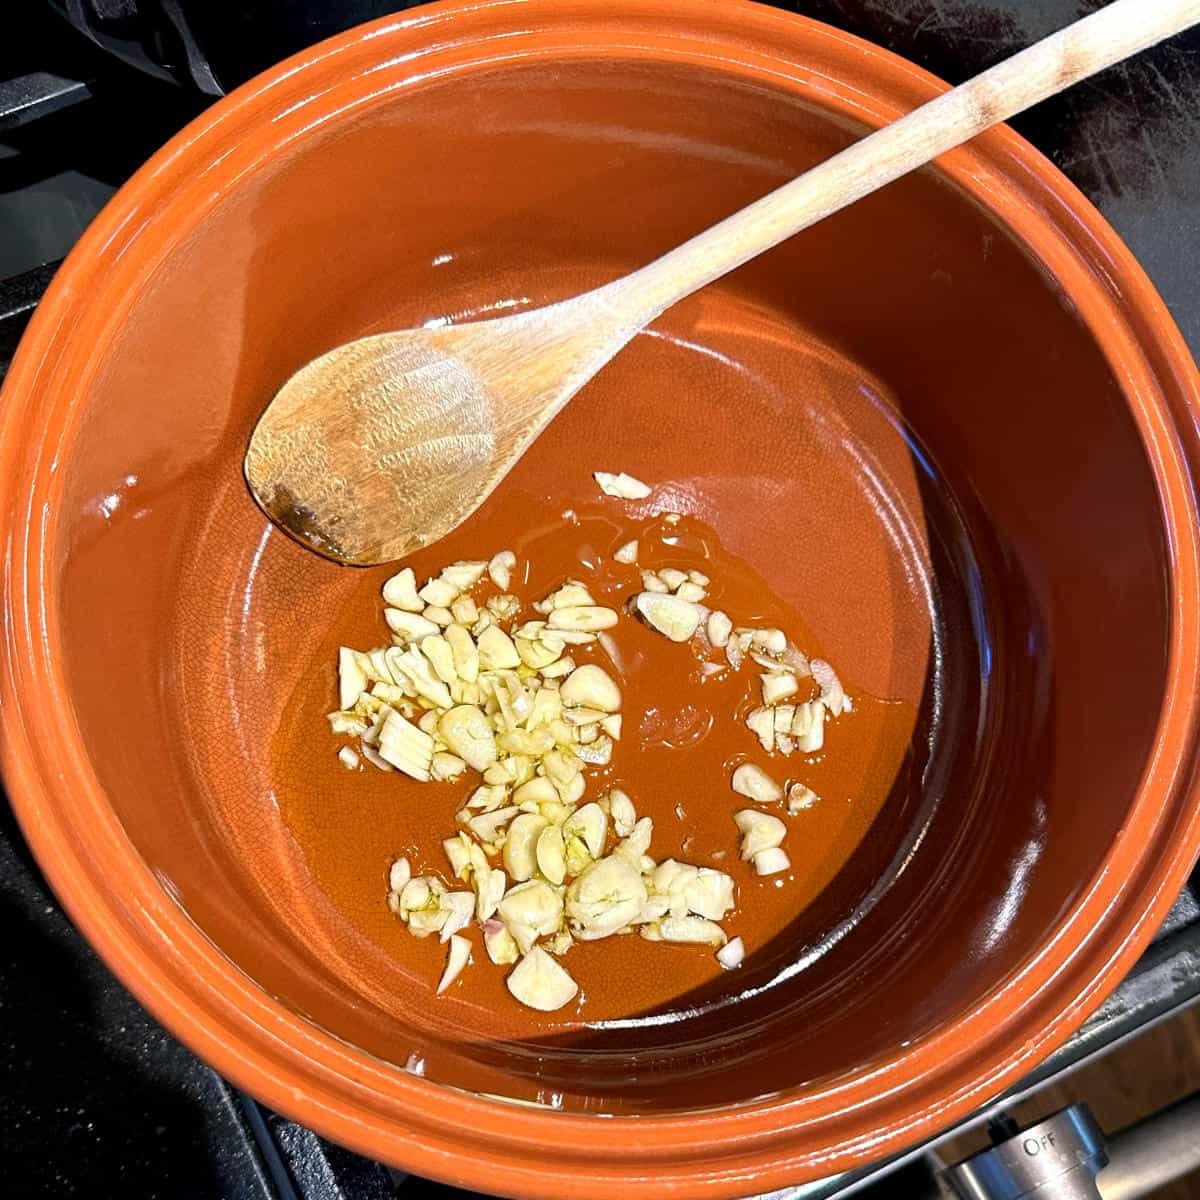 Garlic sauteing in olive oil in pot with wooden ladle.